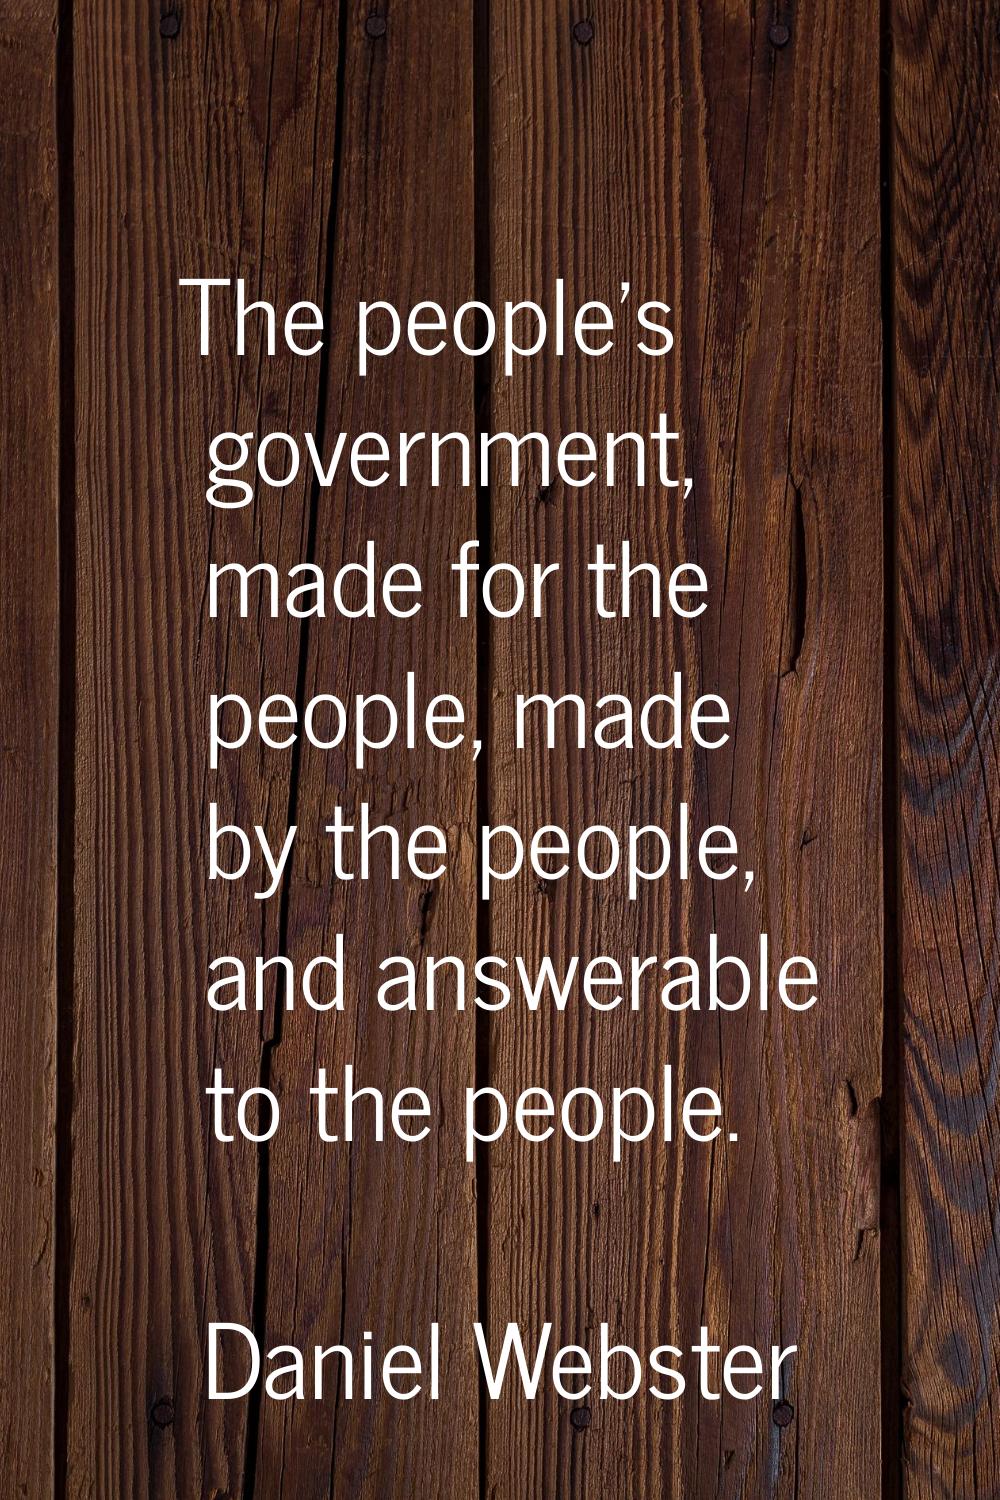 The people's government, made for the people, made by the people, and answerable to the people.